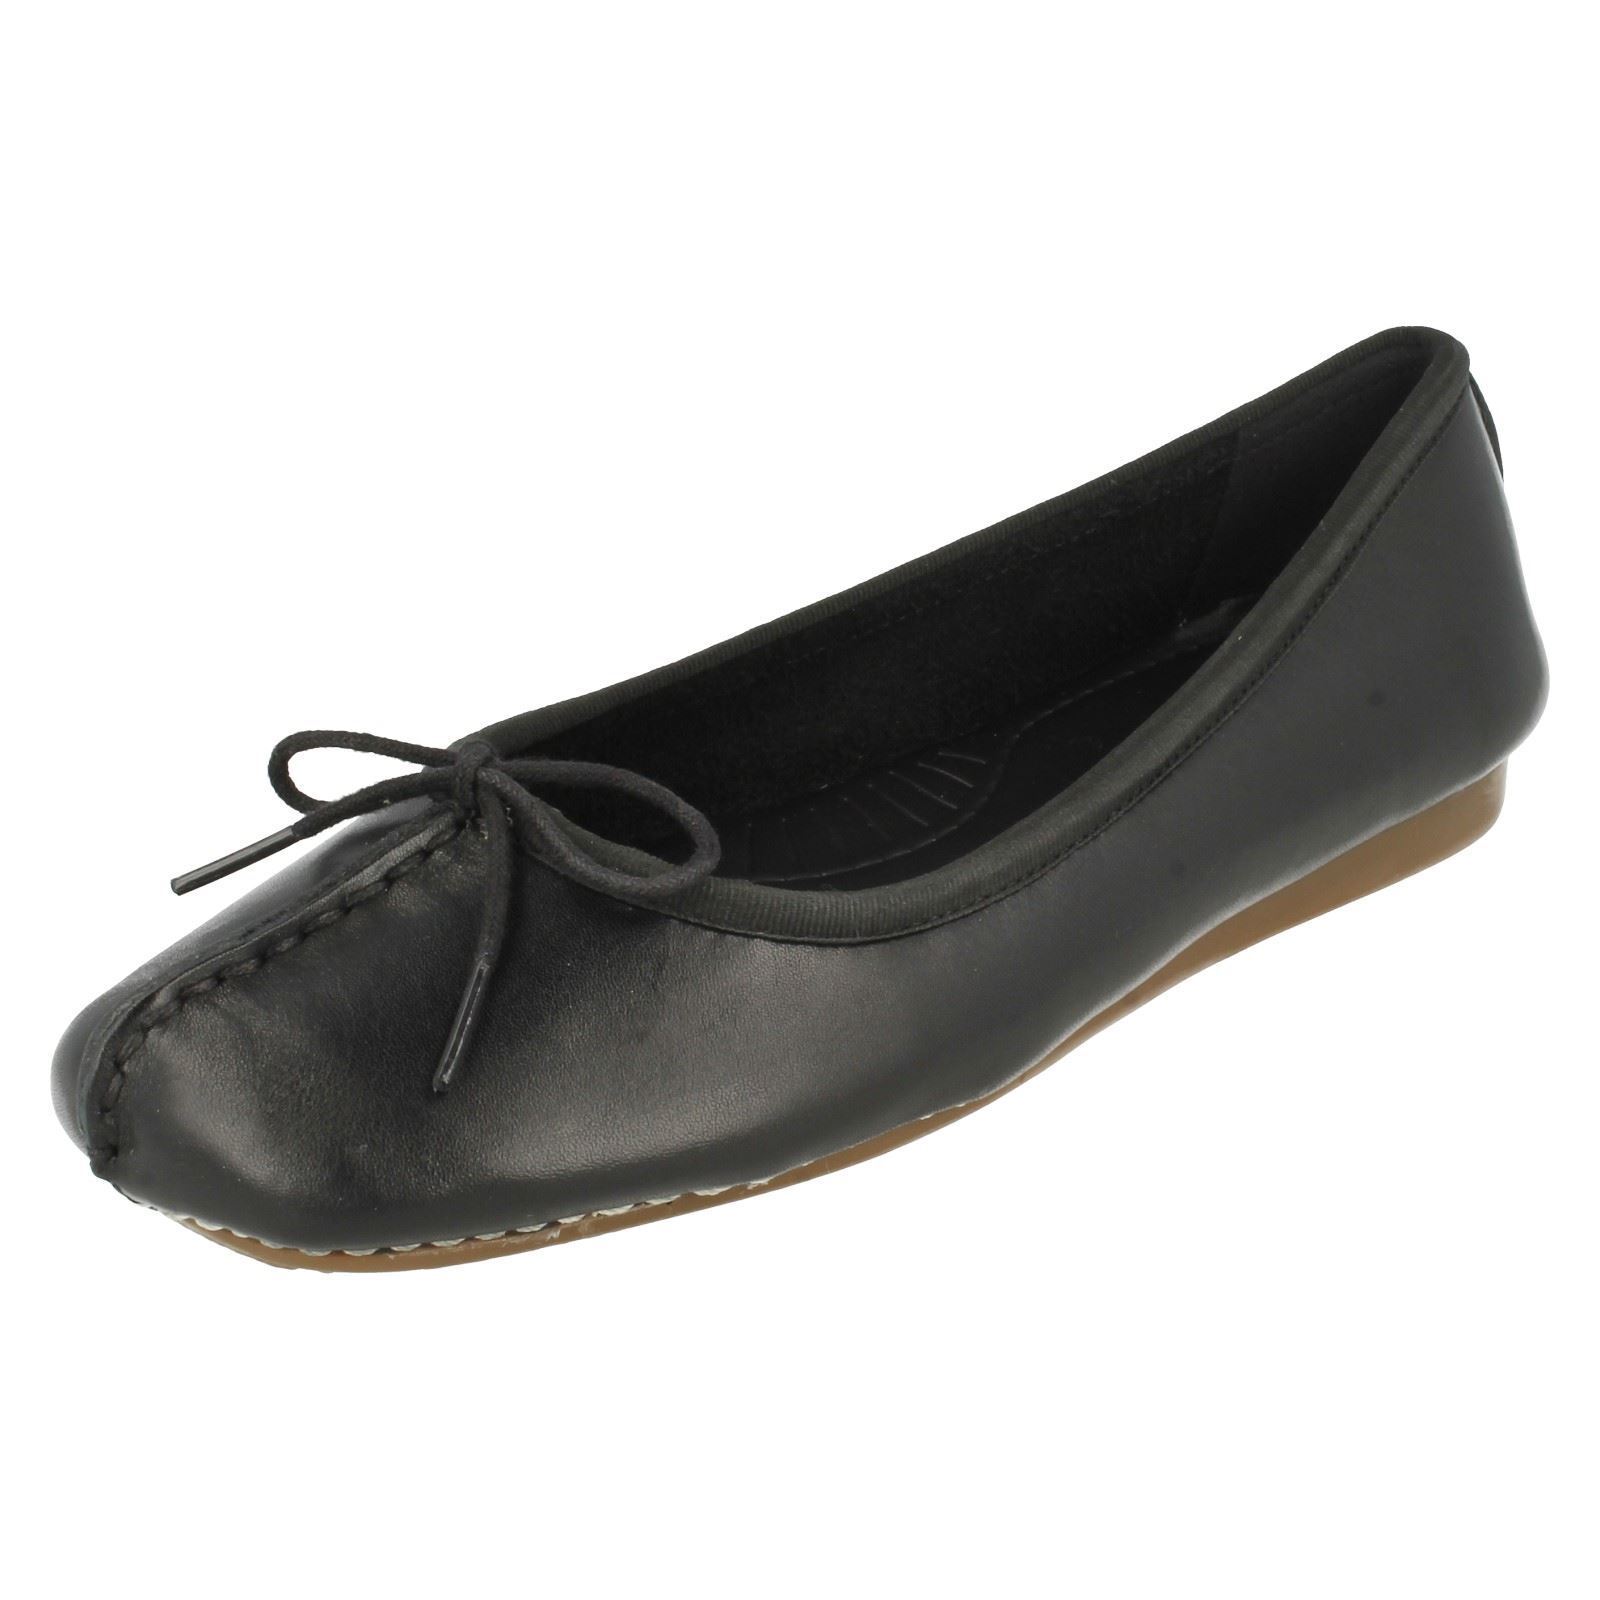 Clarks Freckle Super beauty product restock quality top! Popular brand Ice Black Leather On Casual Shoes Slip